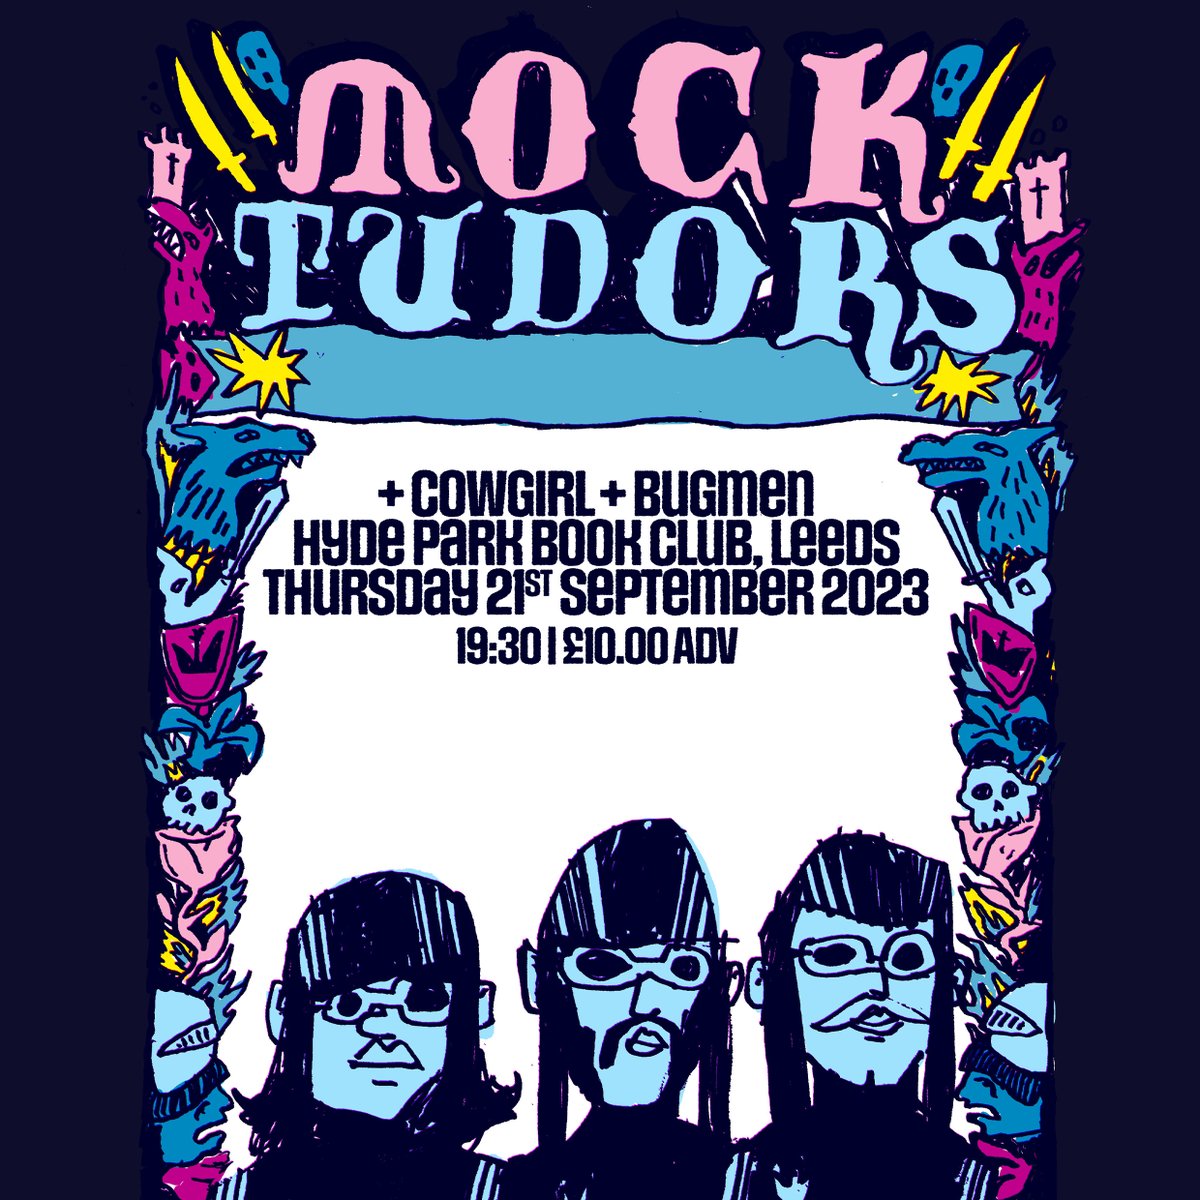 TONIGHT! 🙌 👉 Scottish composer @ErlandCooper is live at @LeftBankLeeds with support from Midori Jaeger. 🎹 👉 @mocktudors pay a visit to @HPBCLeeds alongside @cowgirlband & Bugmen. 🎸 Final tickets below. 👇 ➡️️ bit.ly/ErlandCooper-L… ➡️ bit.ly/MockTudors-Lds…